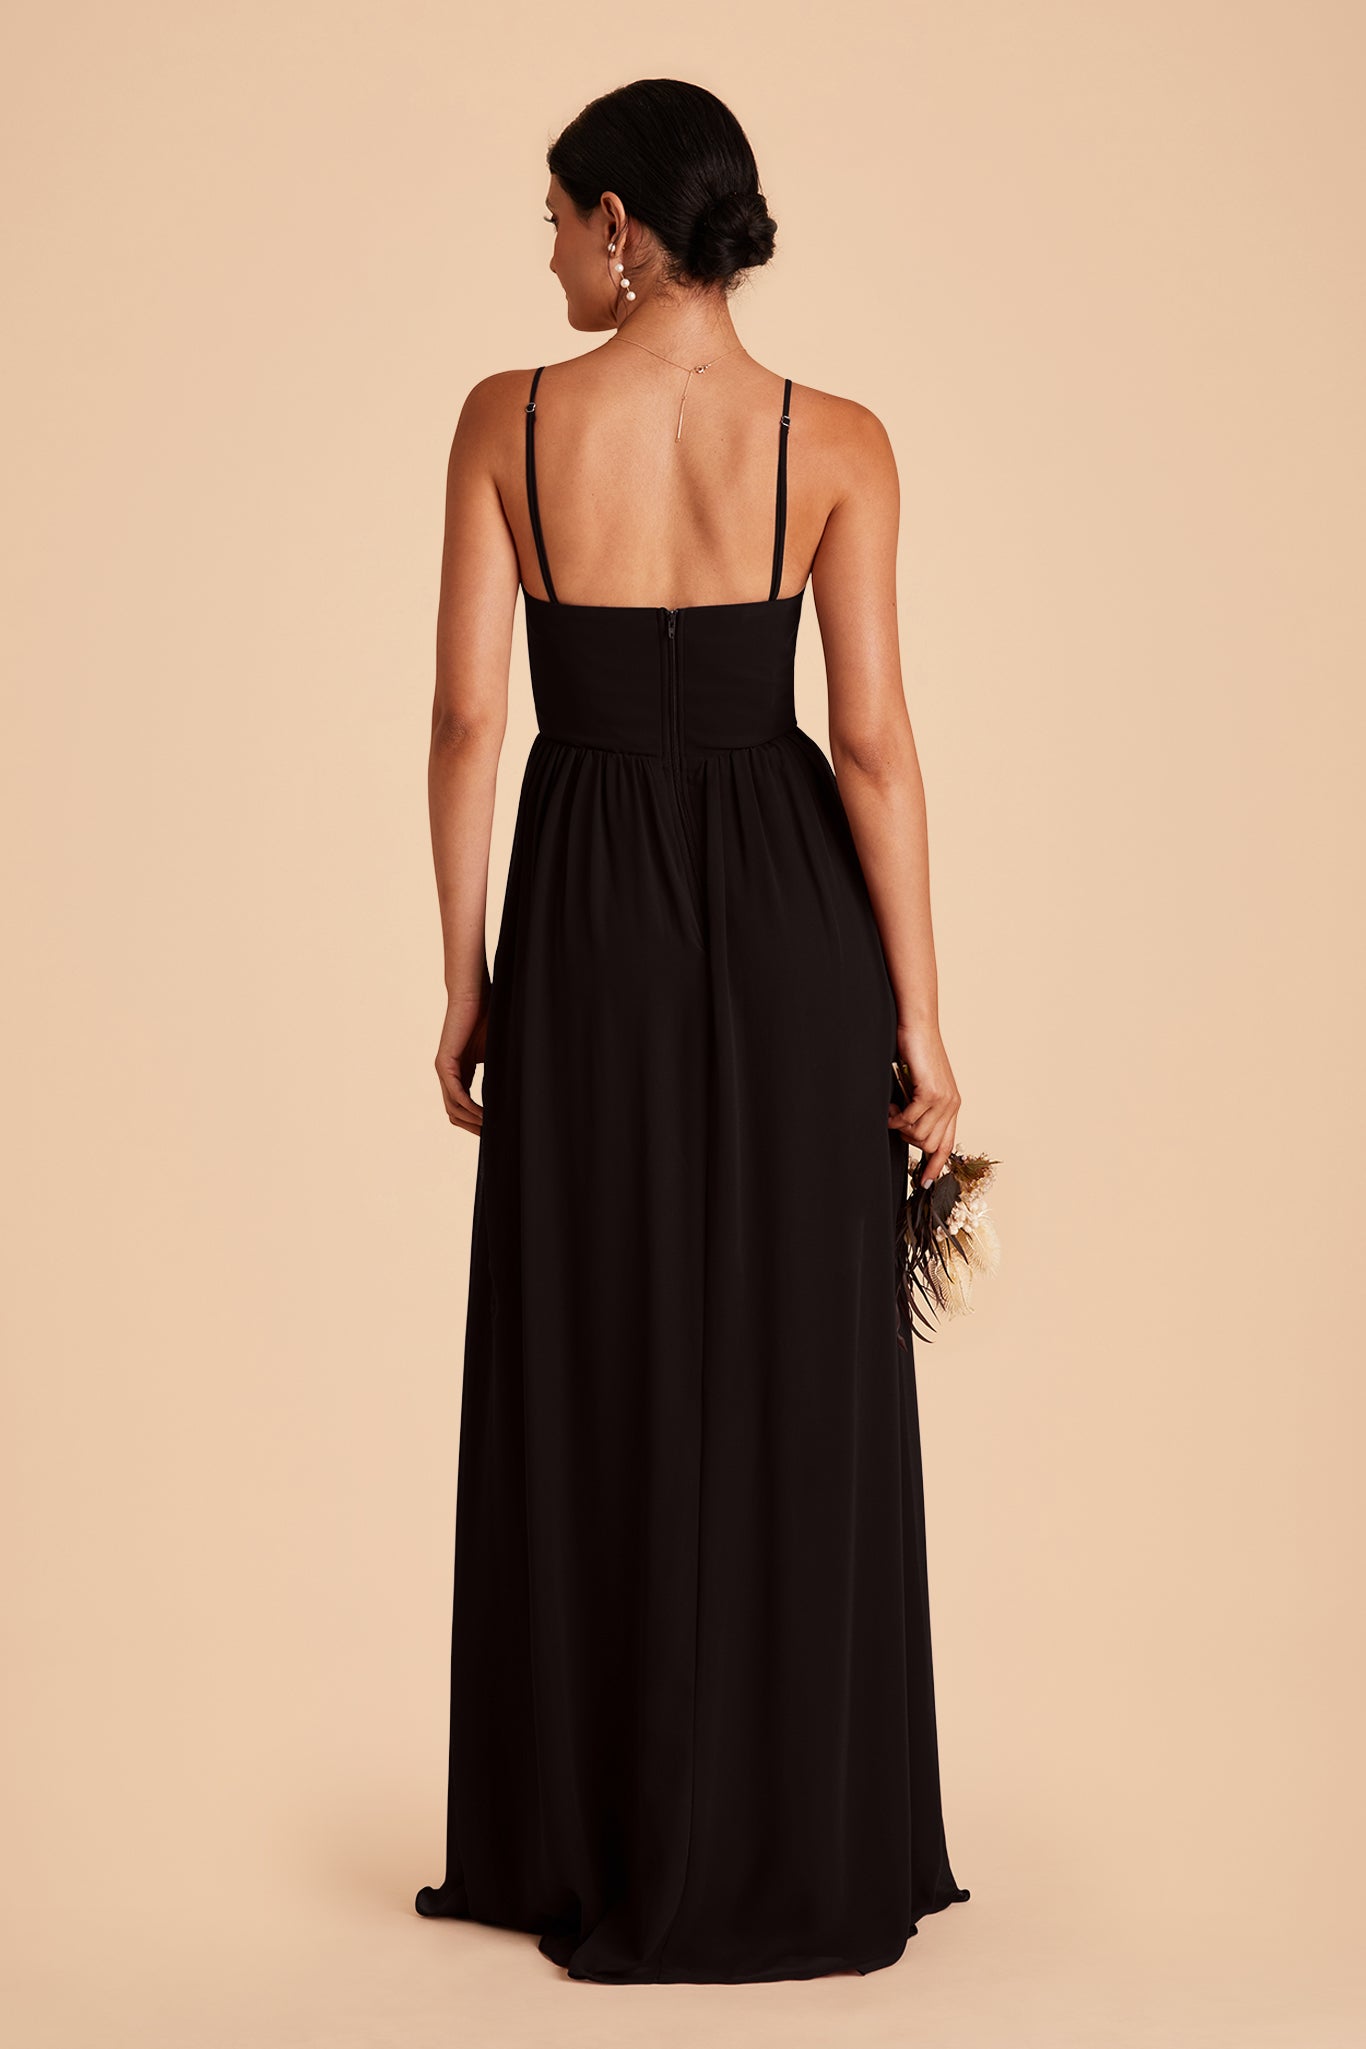 August bridesmaid dress with slit in black chiffon by Birdy Grey, back view